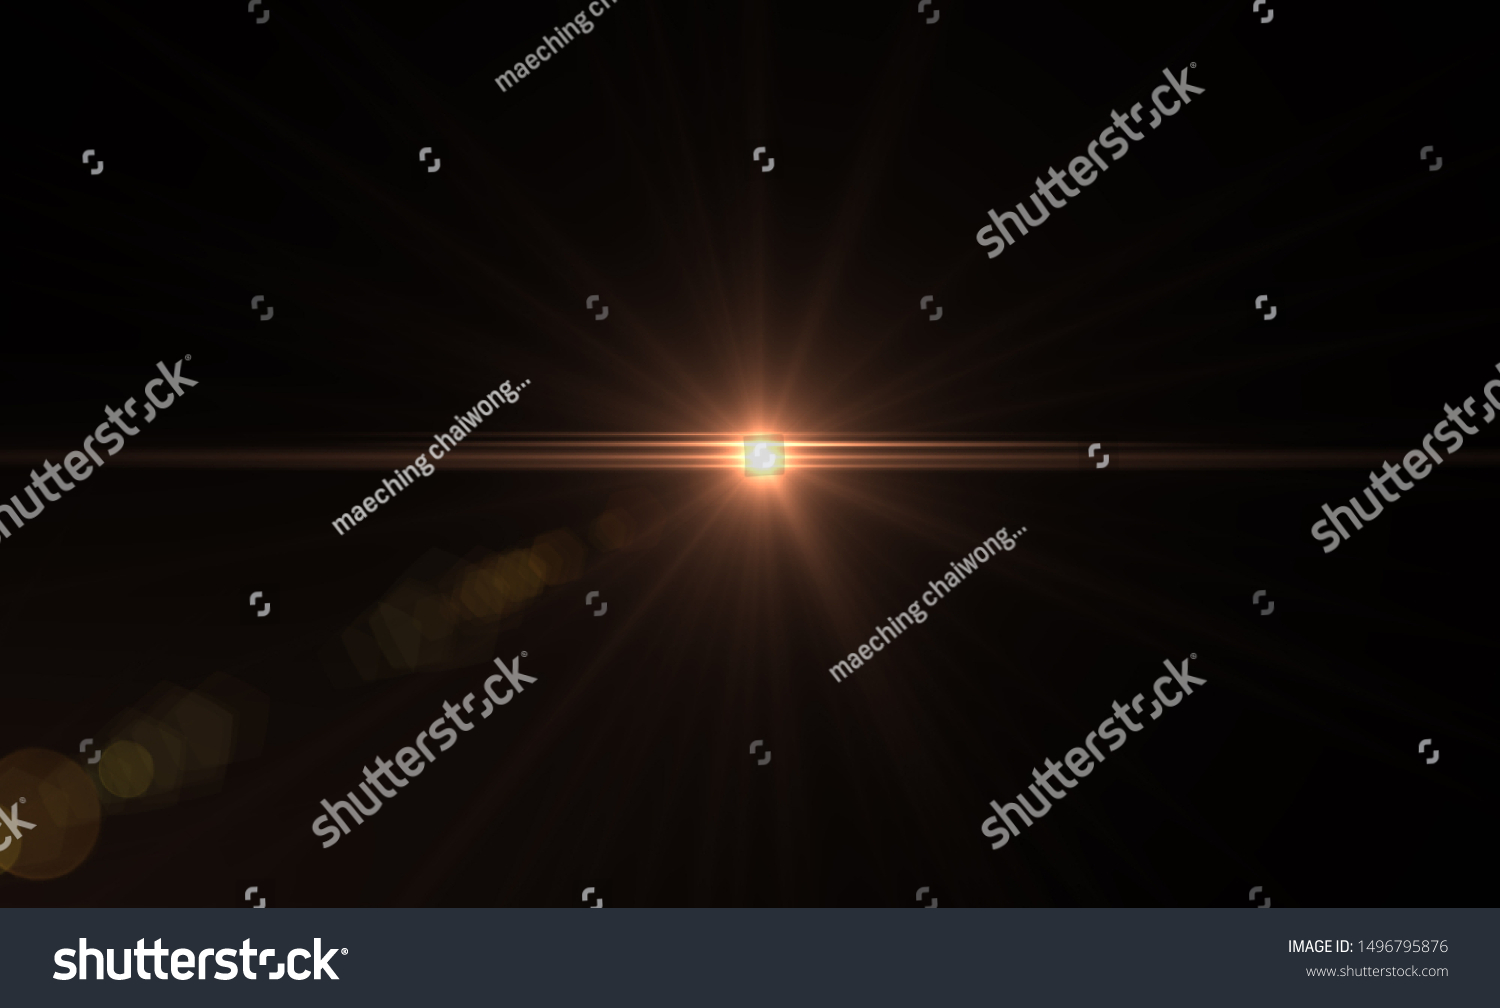 Natural, Sun flare on the black background #1496795876